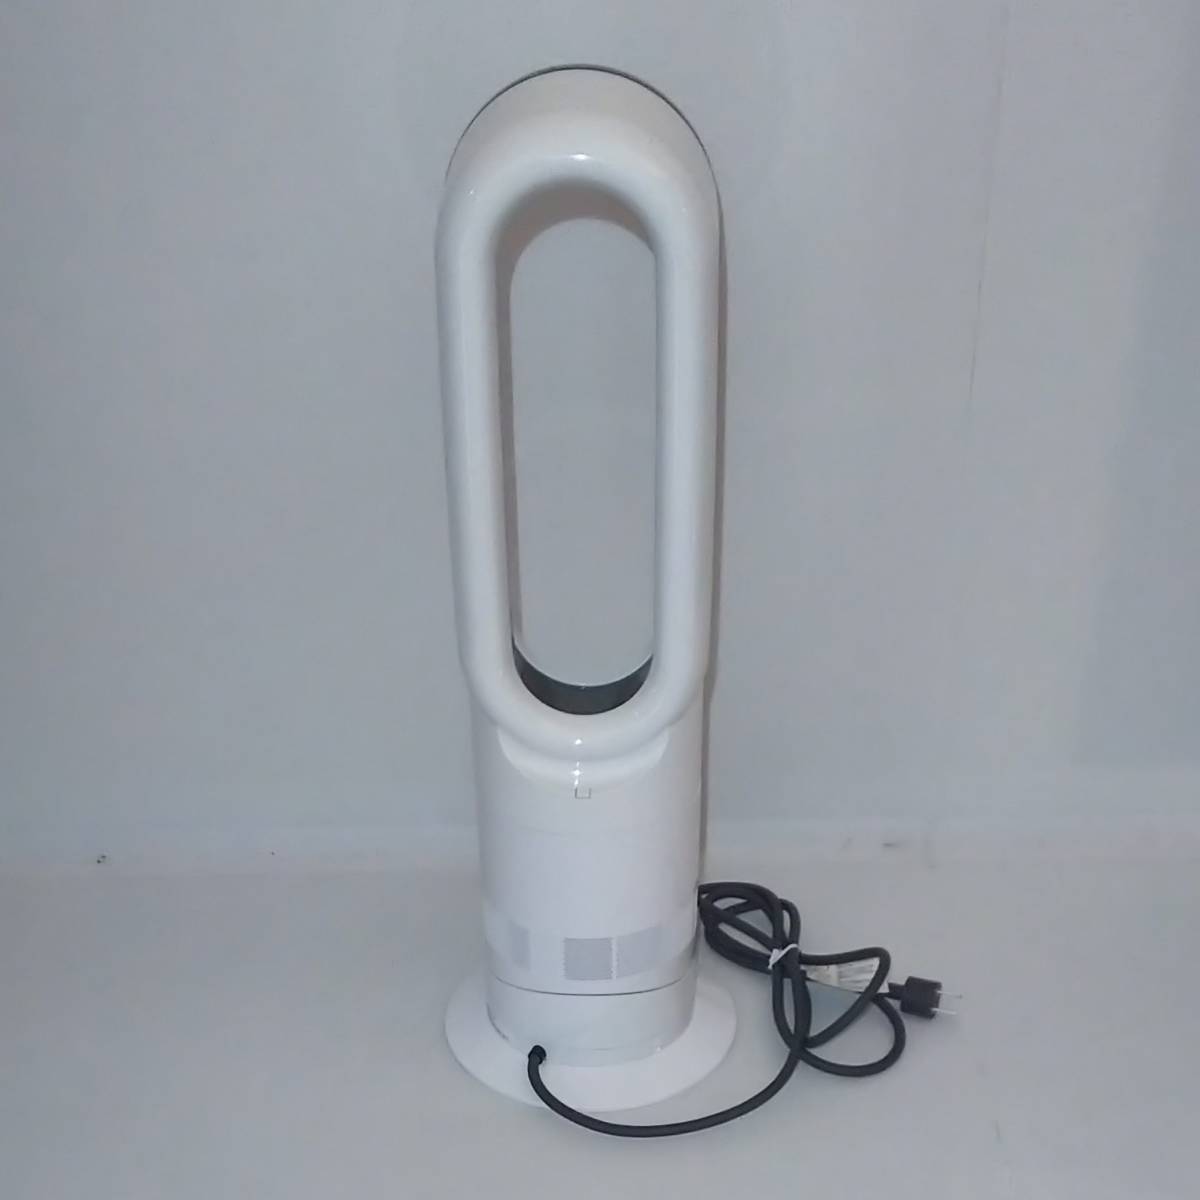 [ almost new goods ]2019 year made feather. not electric fan Dyson Dyson Hot+Cool hot cool AM09 white / nickel 